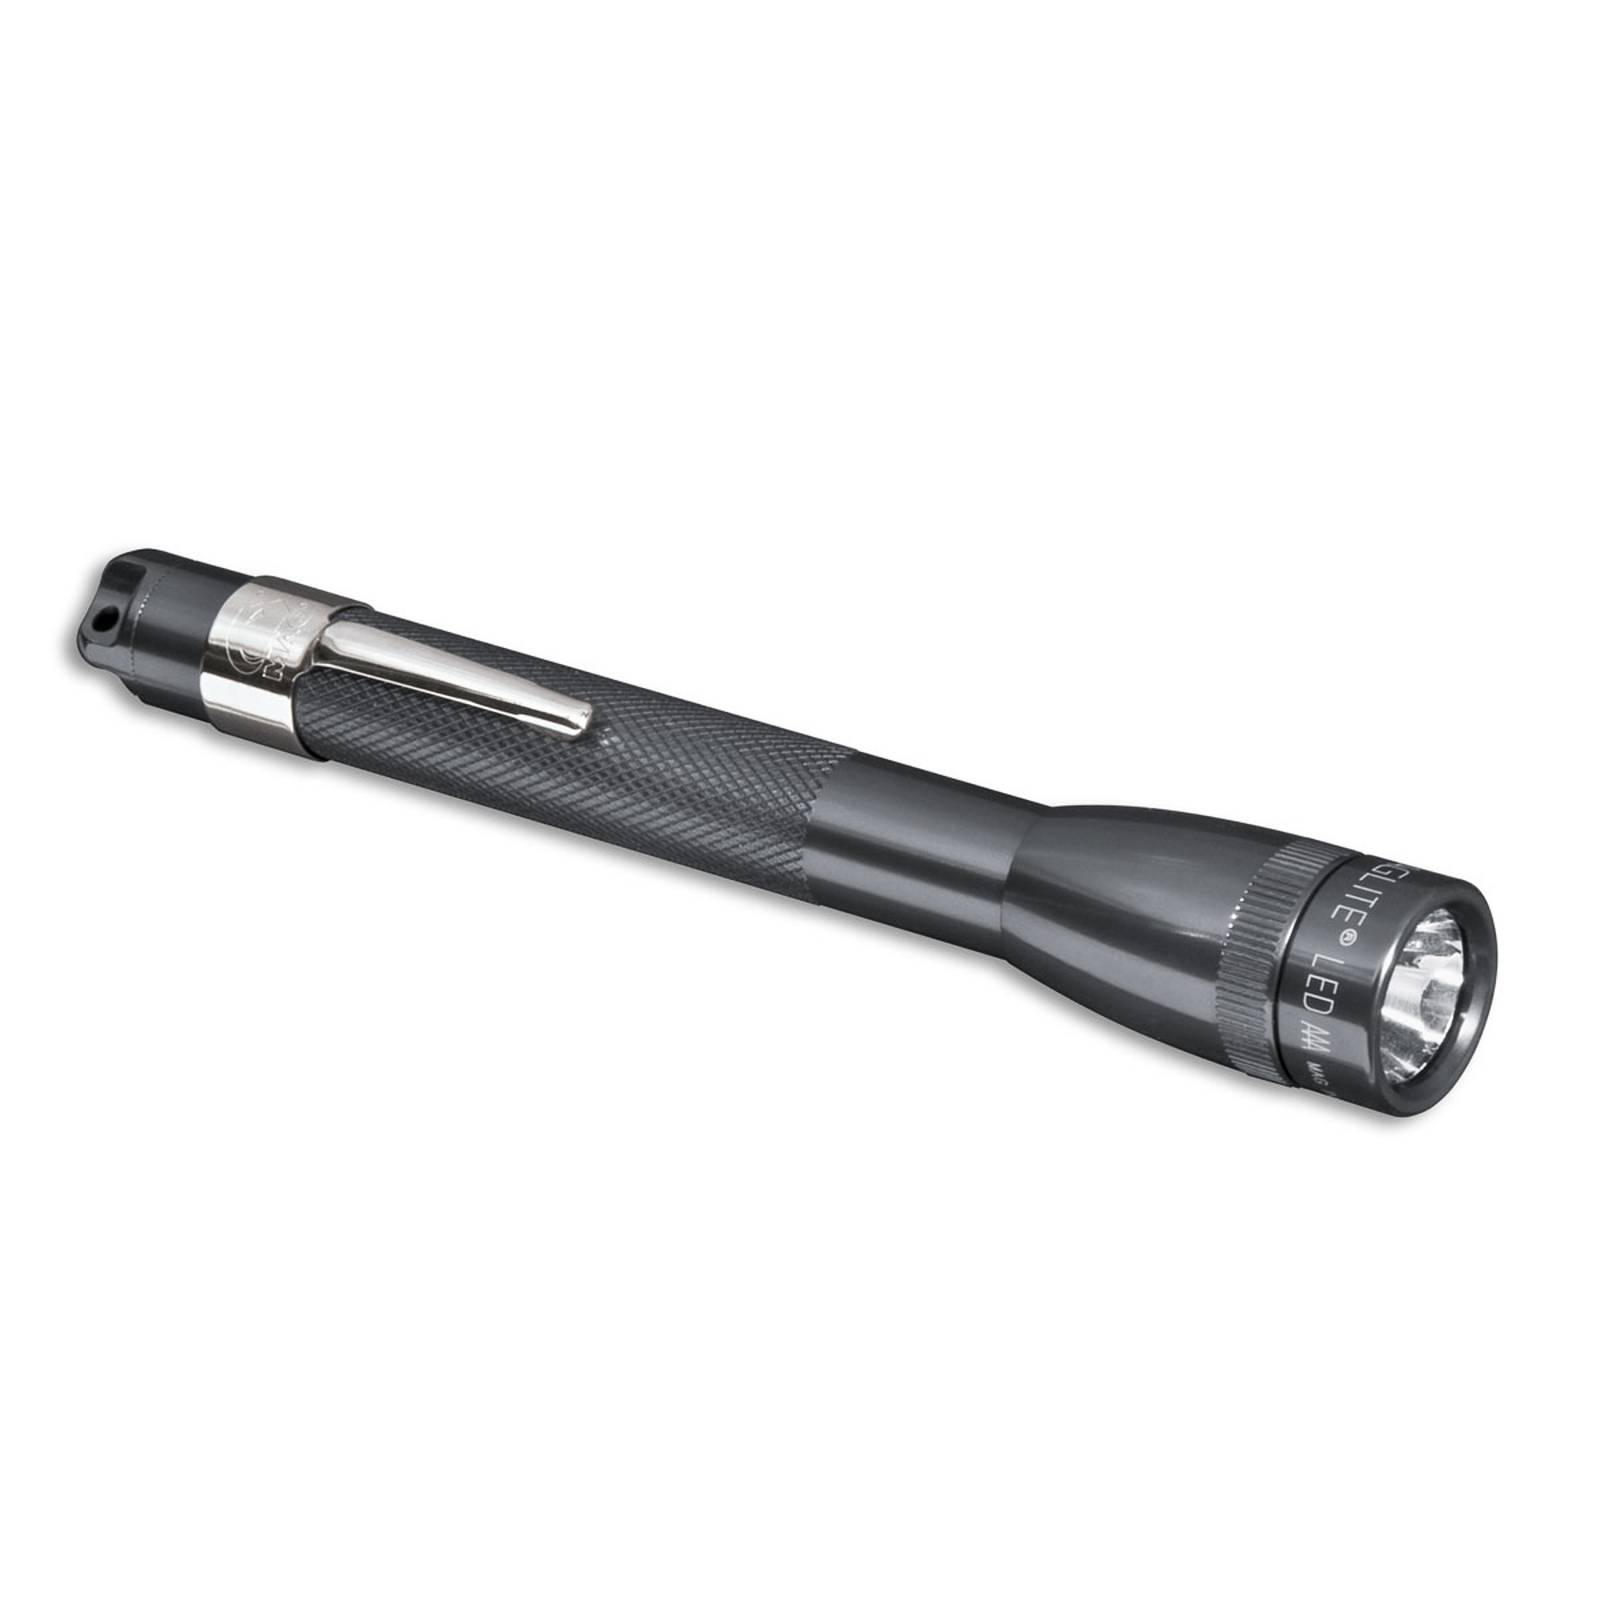 Image of Lampe de poche LED Maglite Mini, 2-Cell AAA, grise 